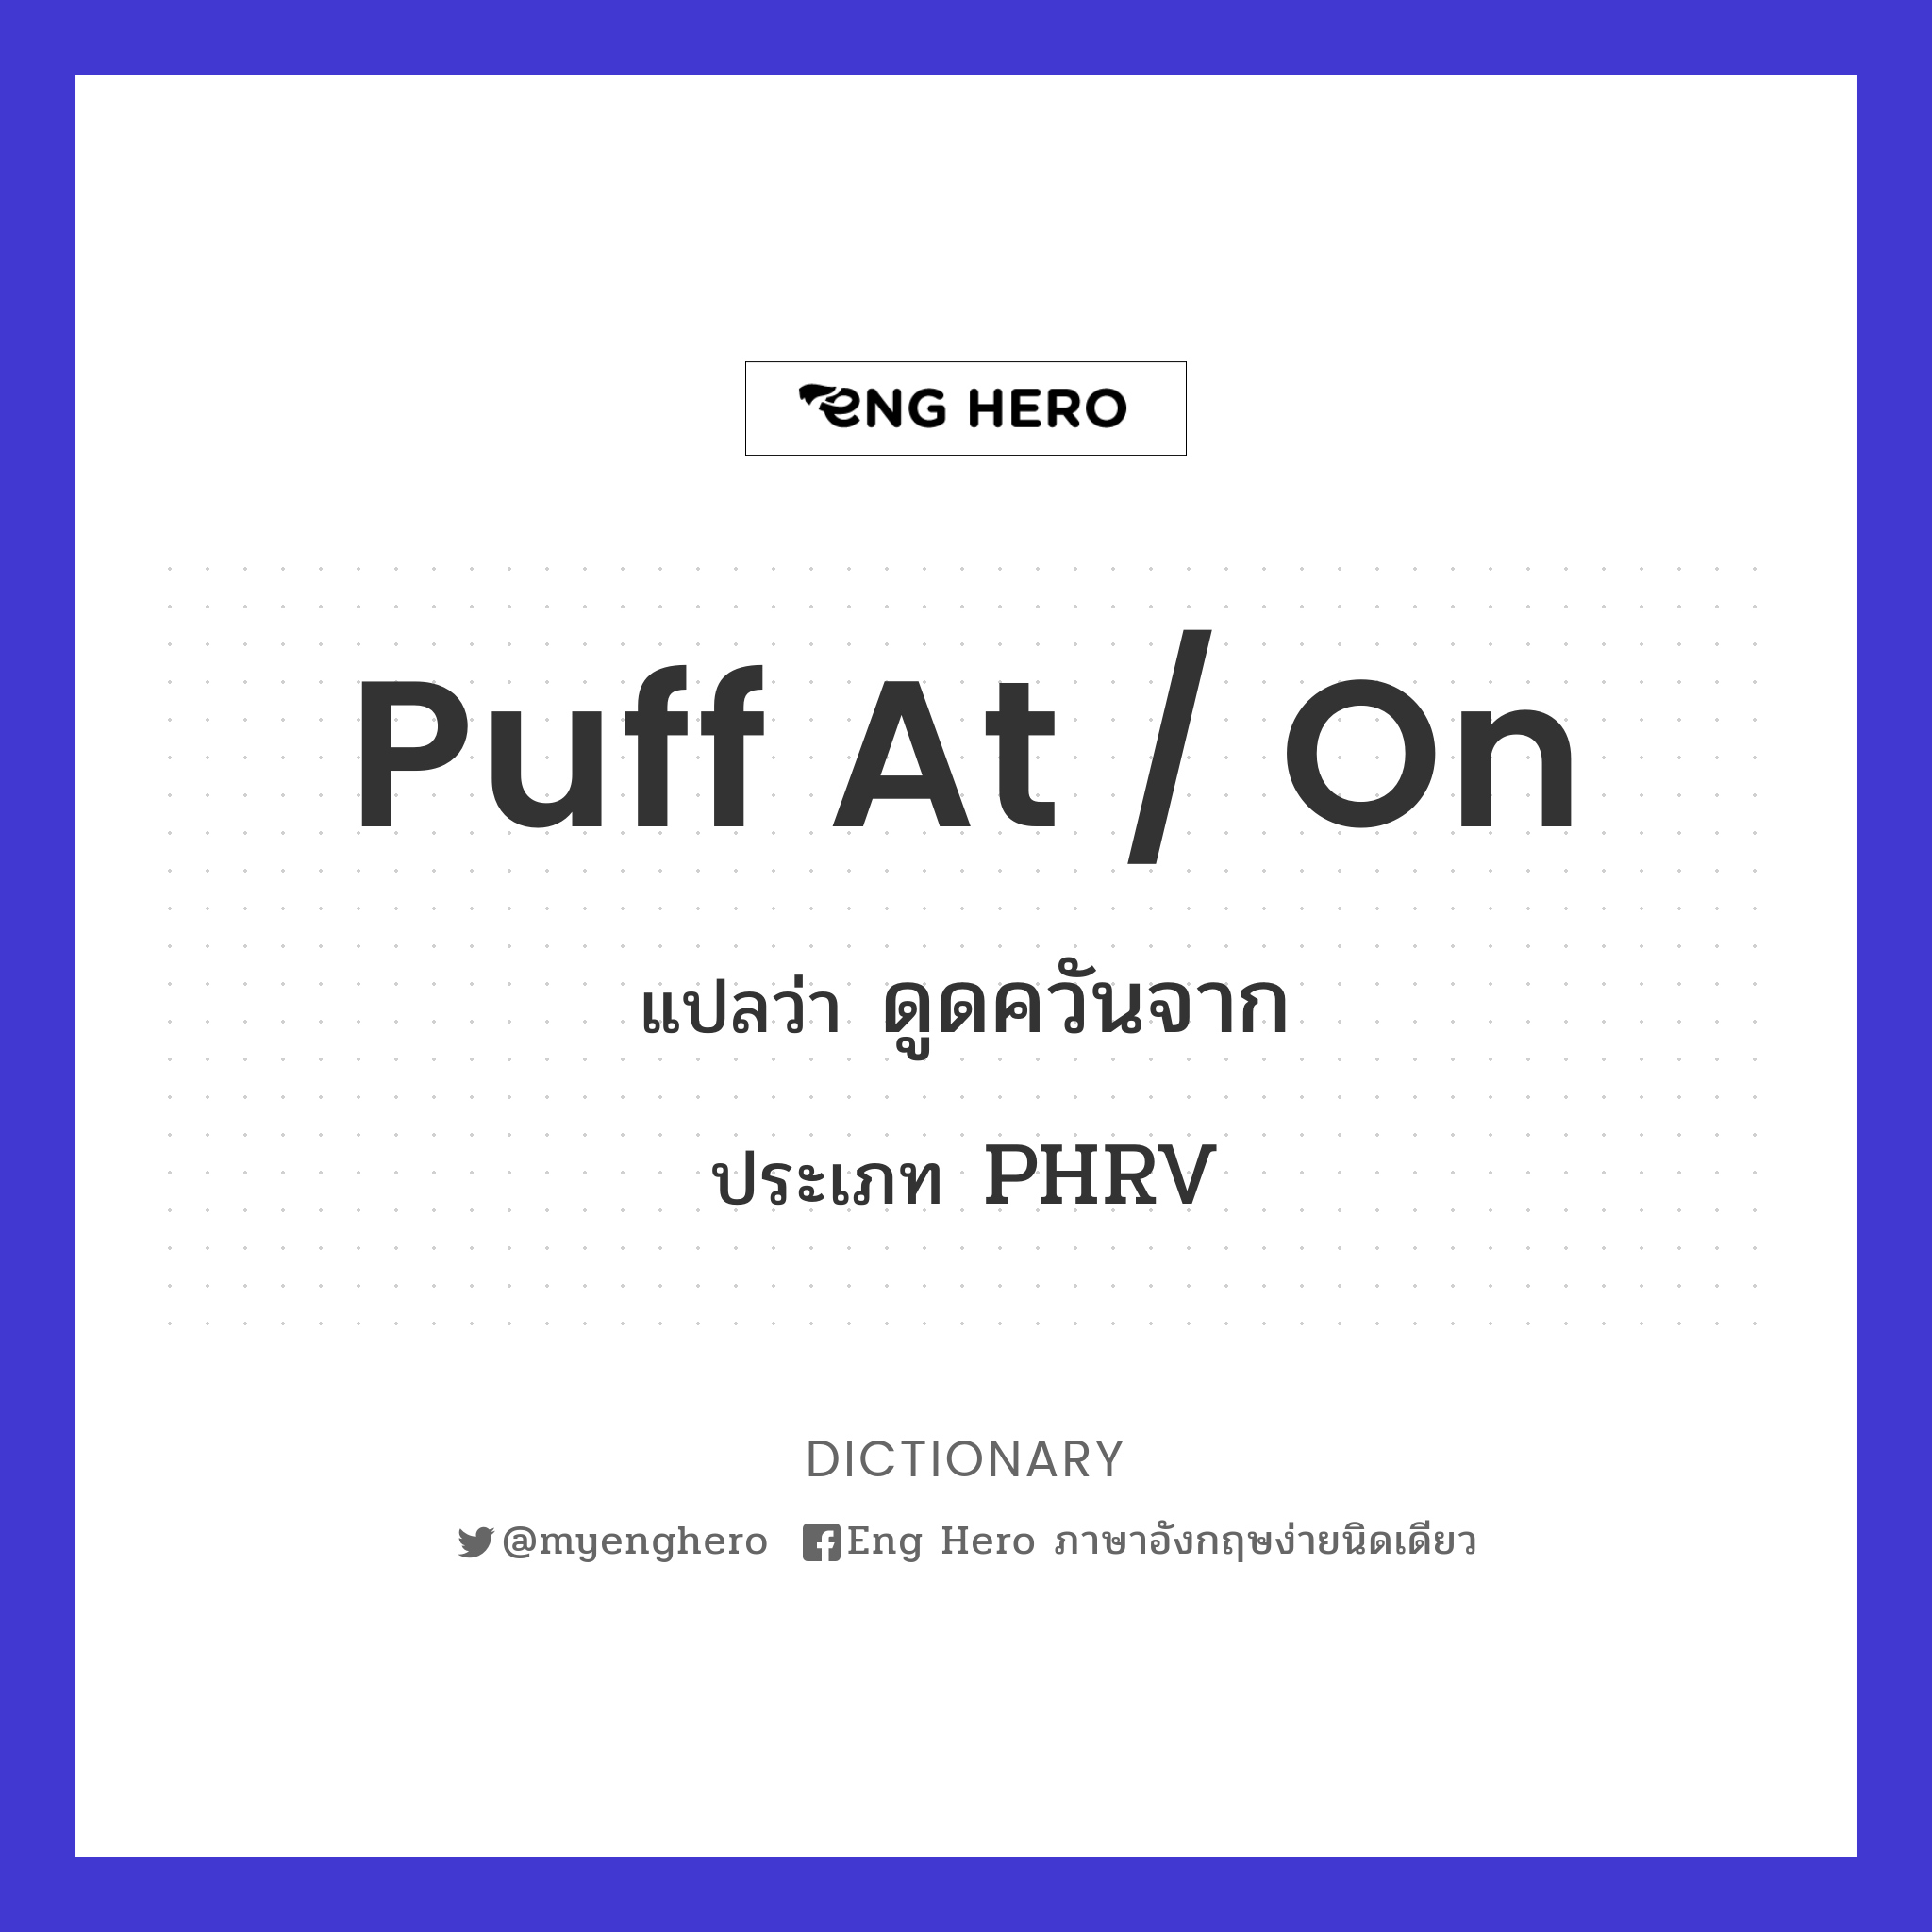 puff at / on